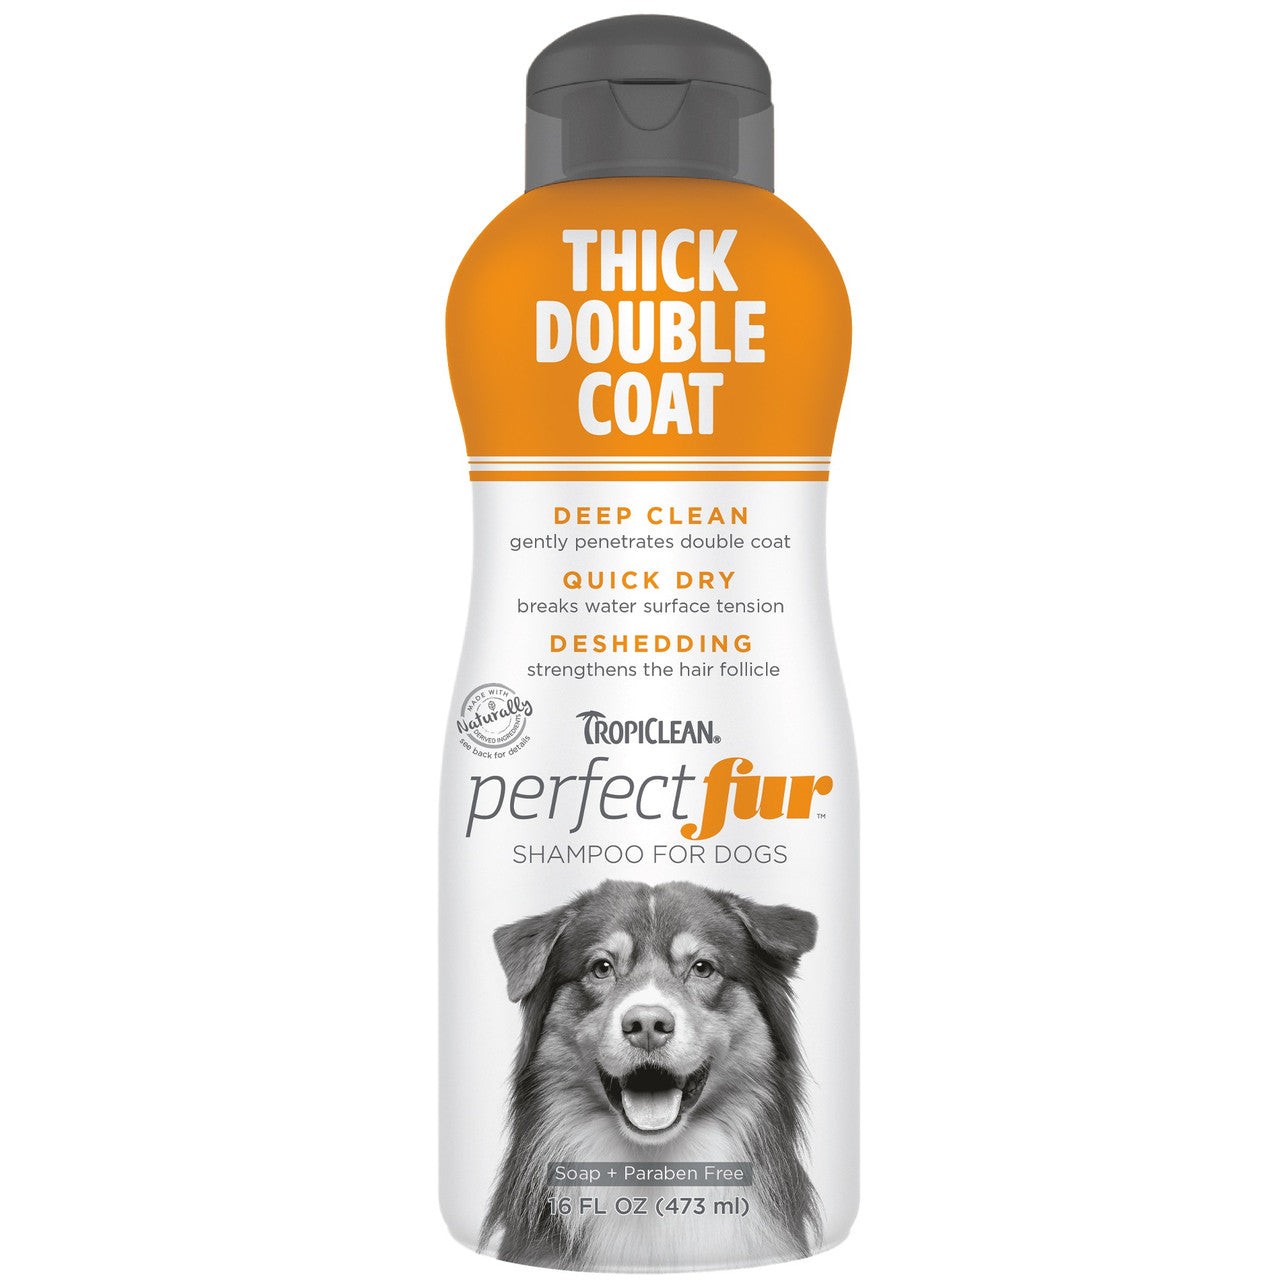 TropiClean PerfectFur Thick Double Coat Shampoo for Dogs 16oz